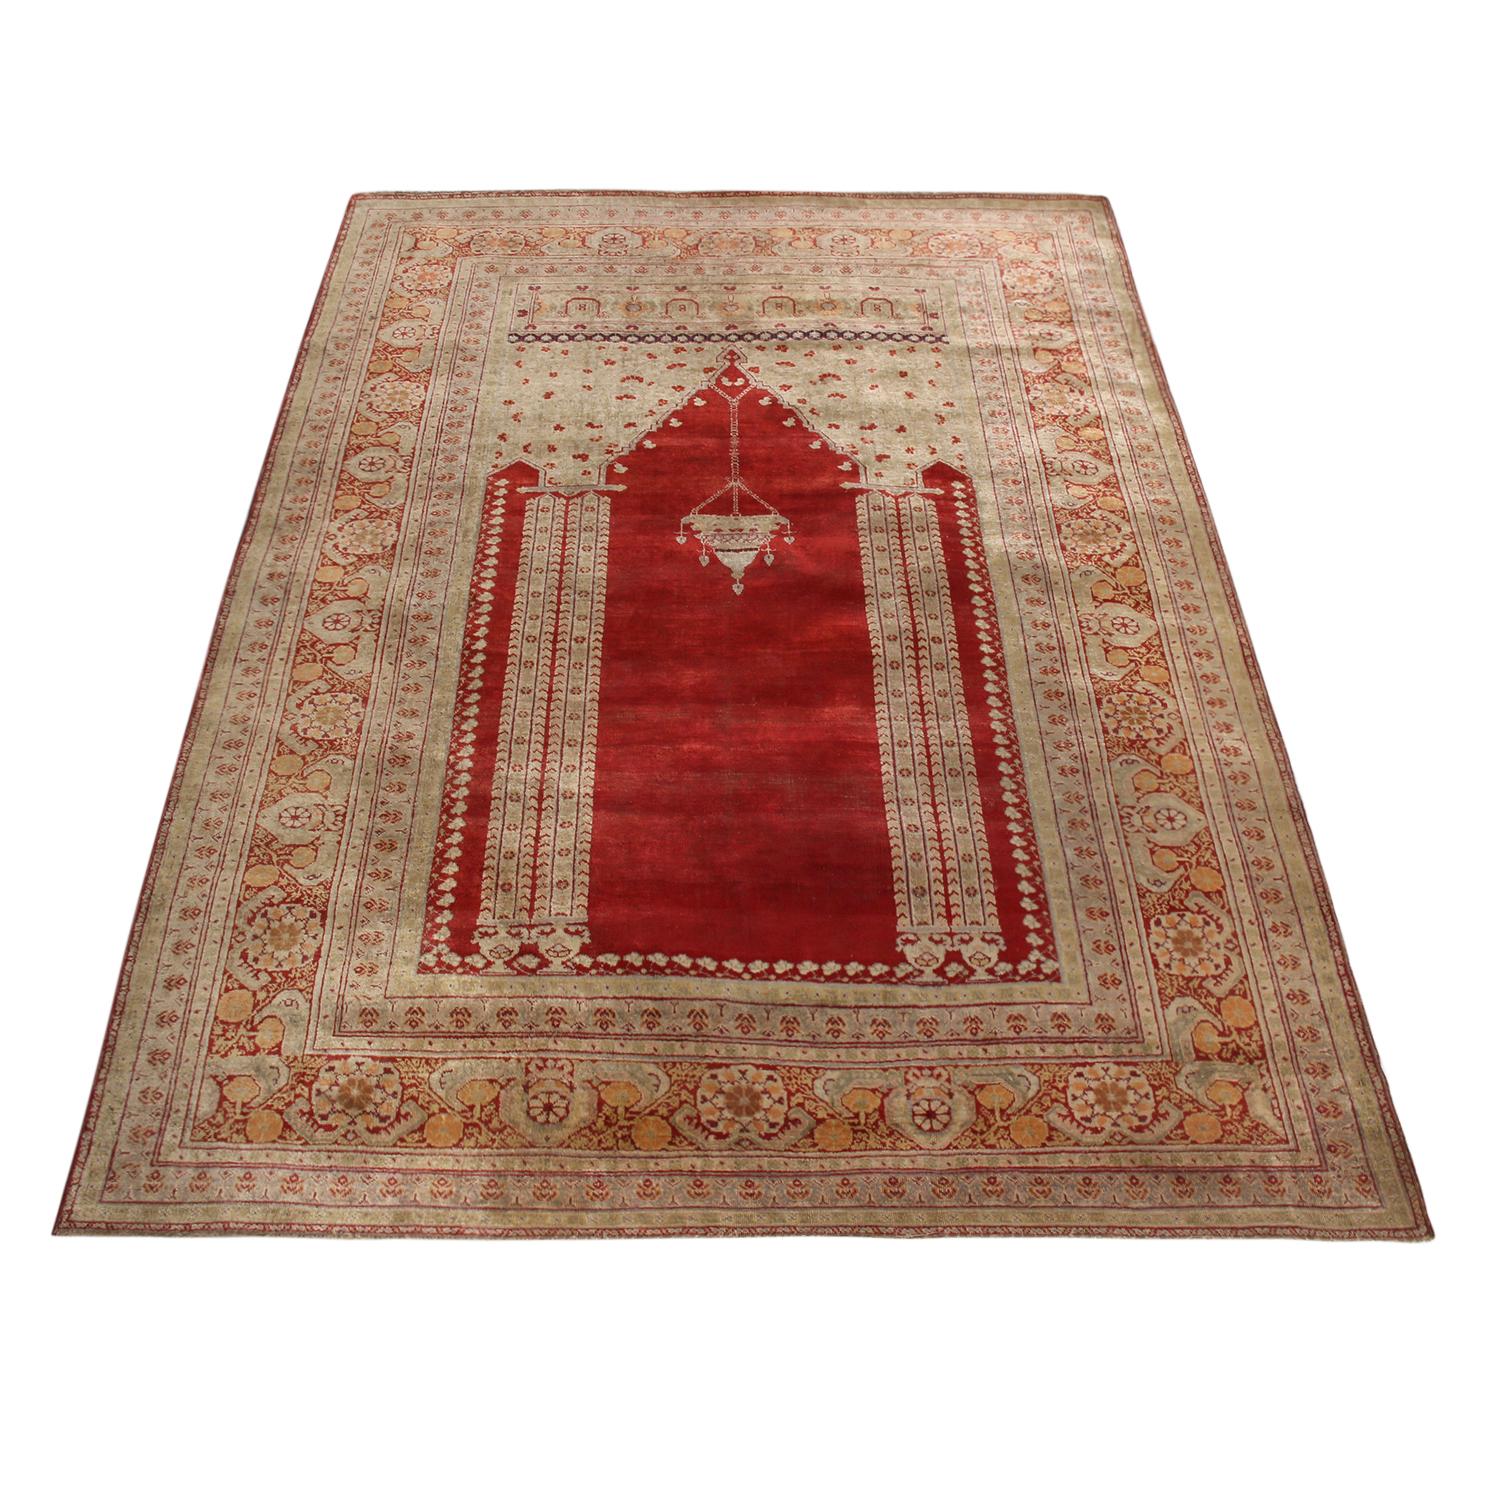 Hand knotted in high-quality wool originating from Turkey between 1880-1890, this antique Kayseri rug enjoys one of the richest abrashed vermillion red field backgrounds, further accented by the sharpness of detail in the chandelier-column motifs